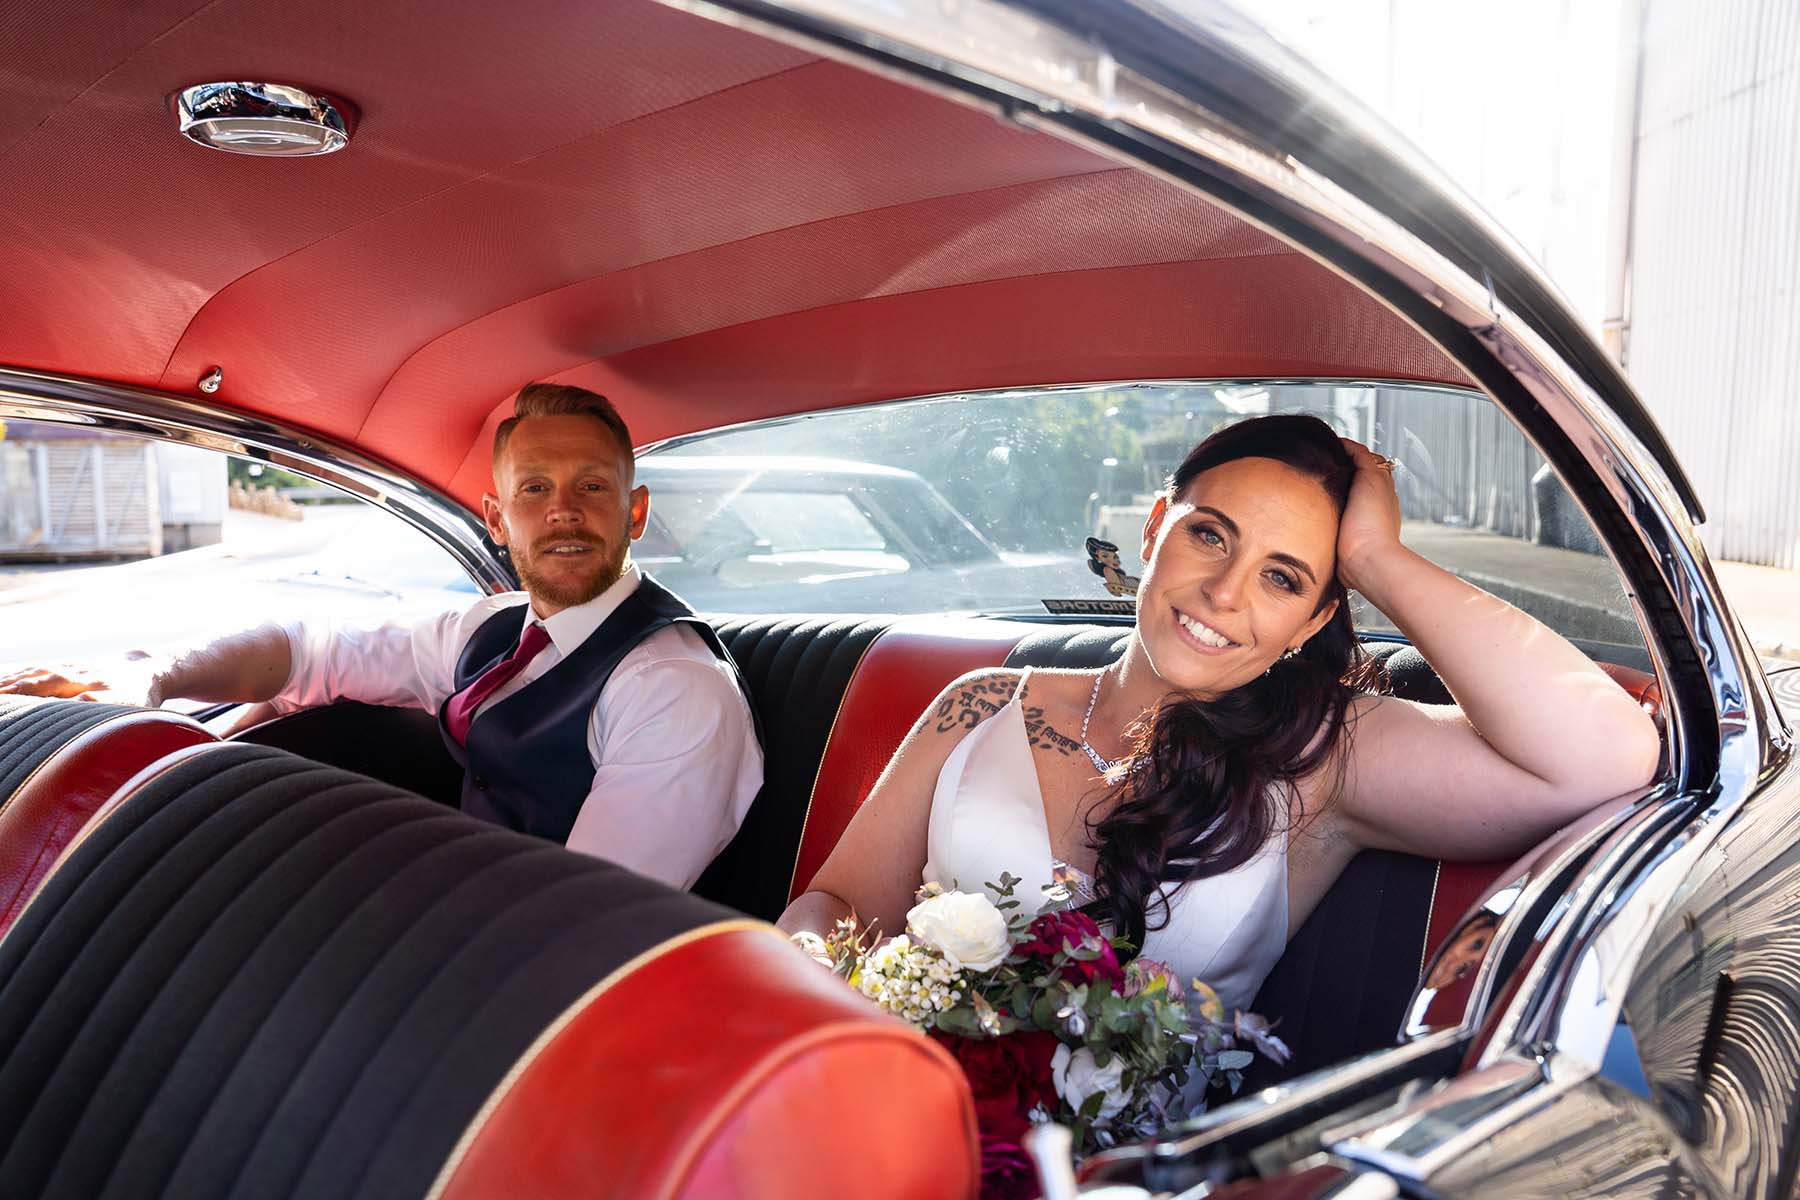 Wedding Photography - Bride and Groom in car